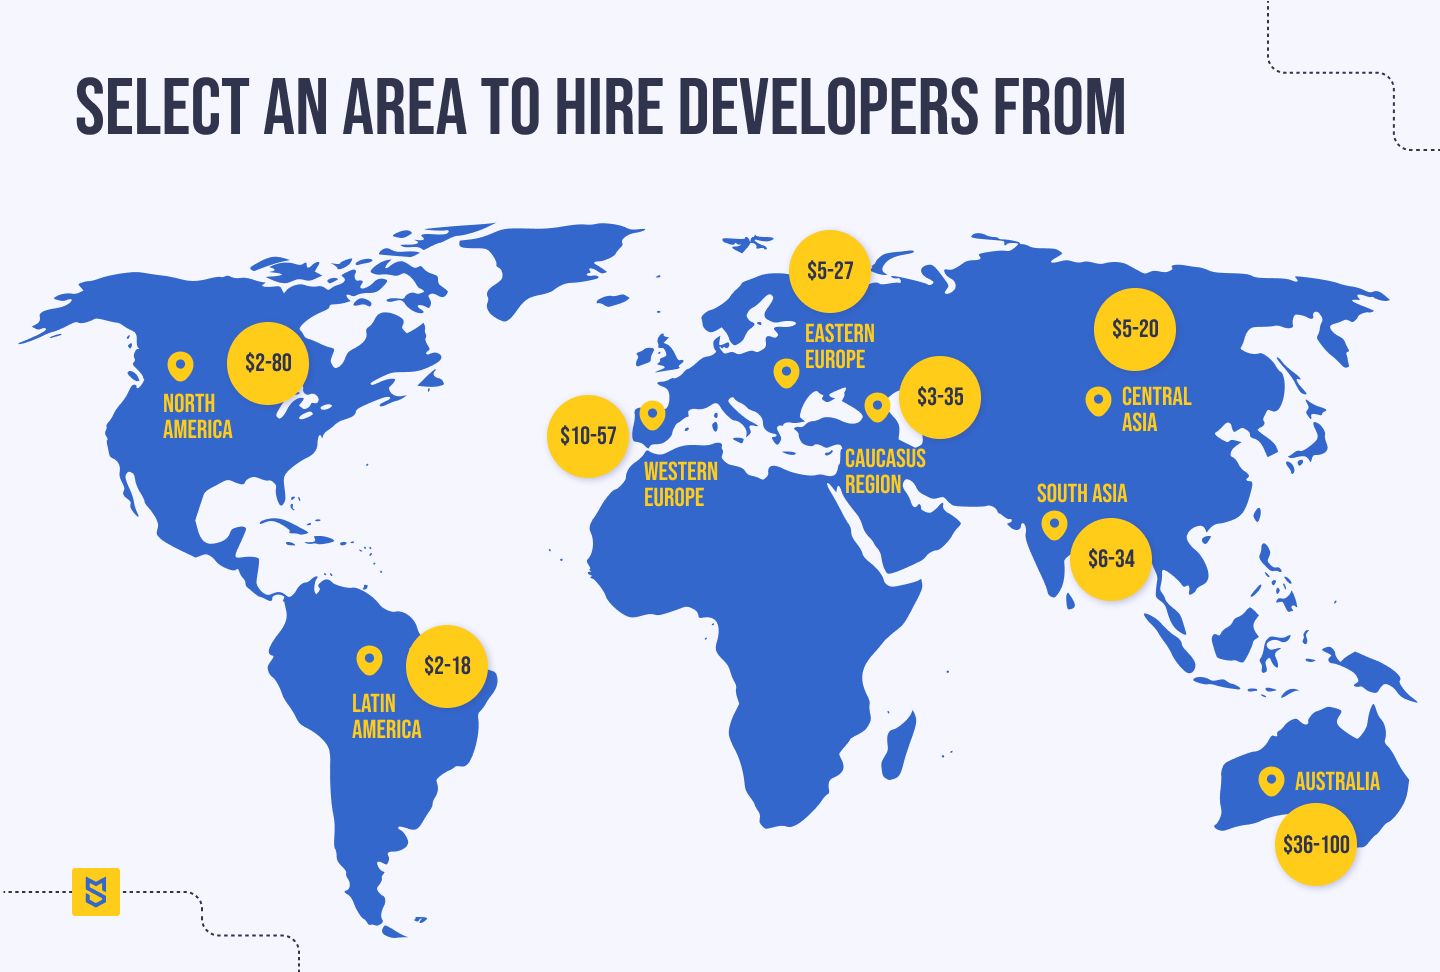 Select an area to hire developers from